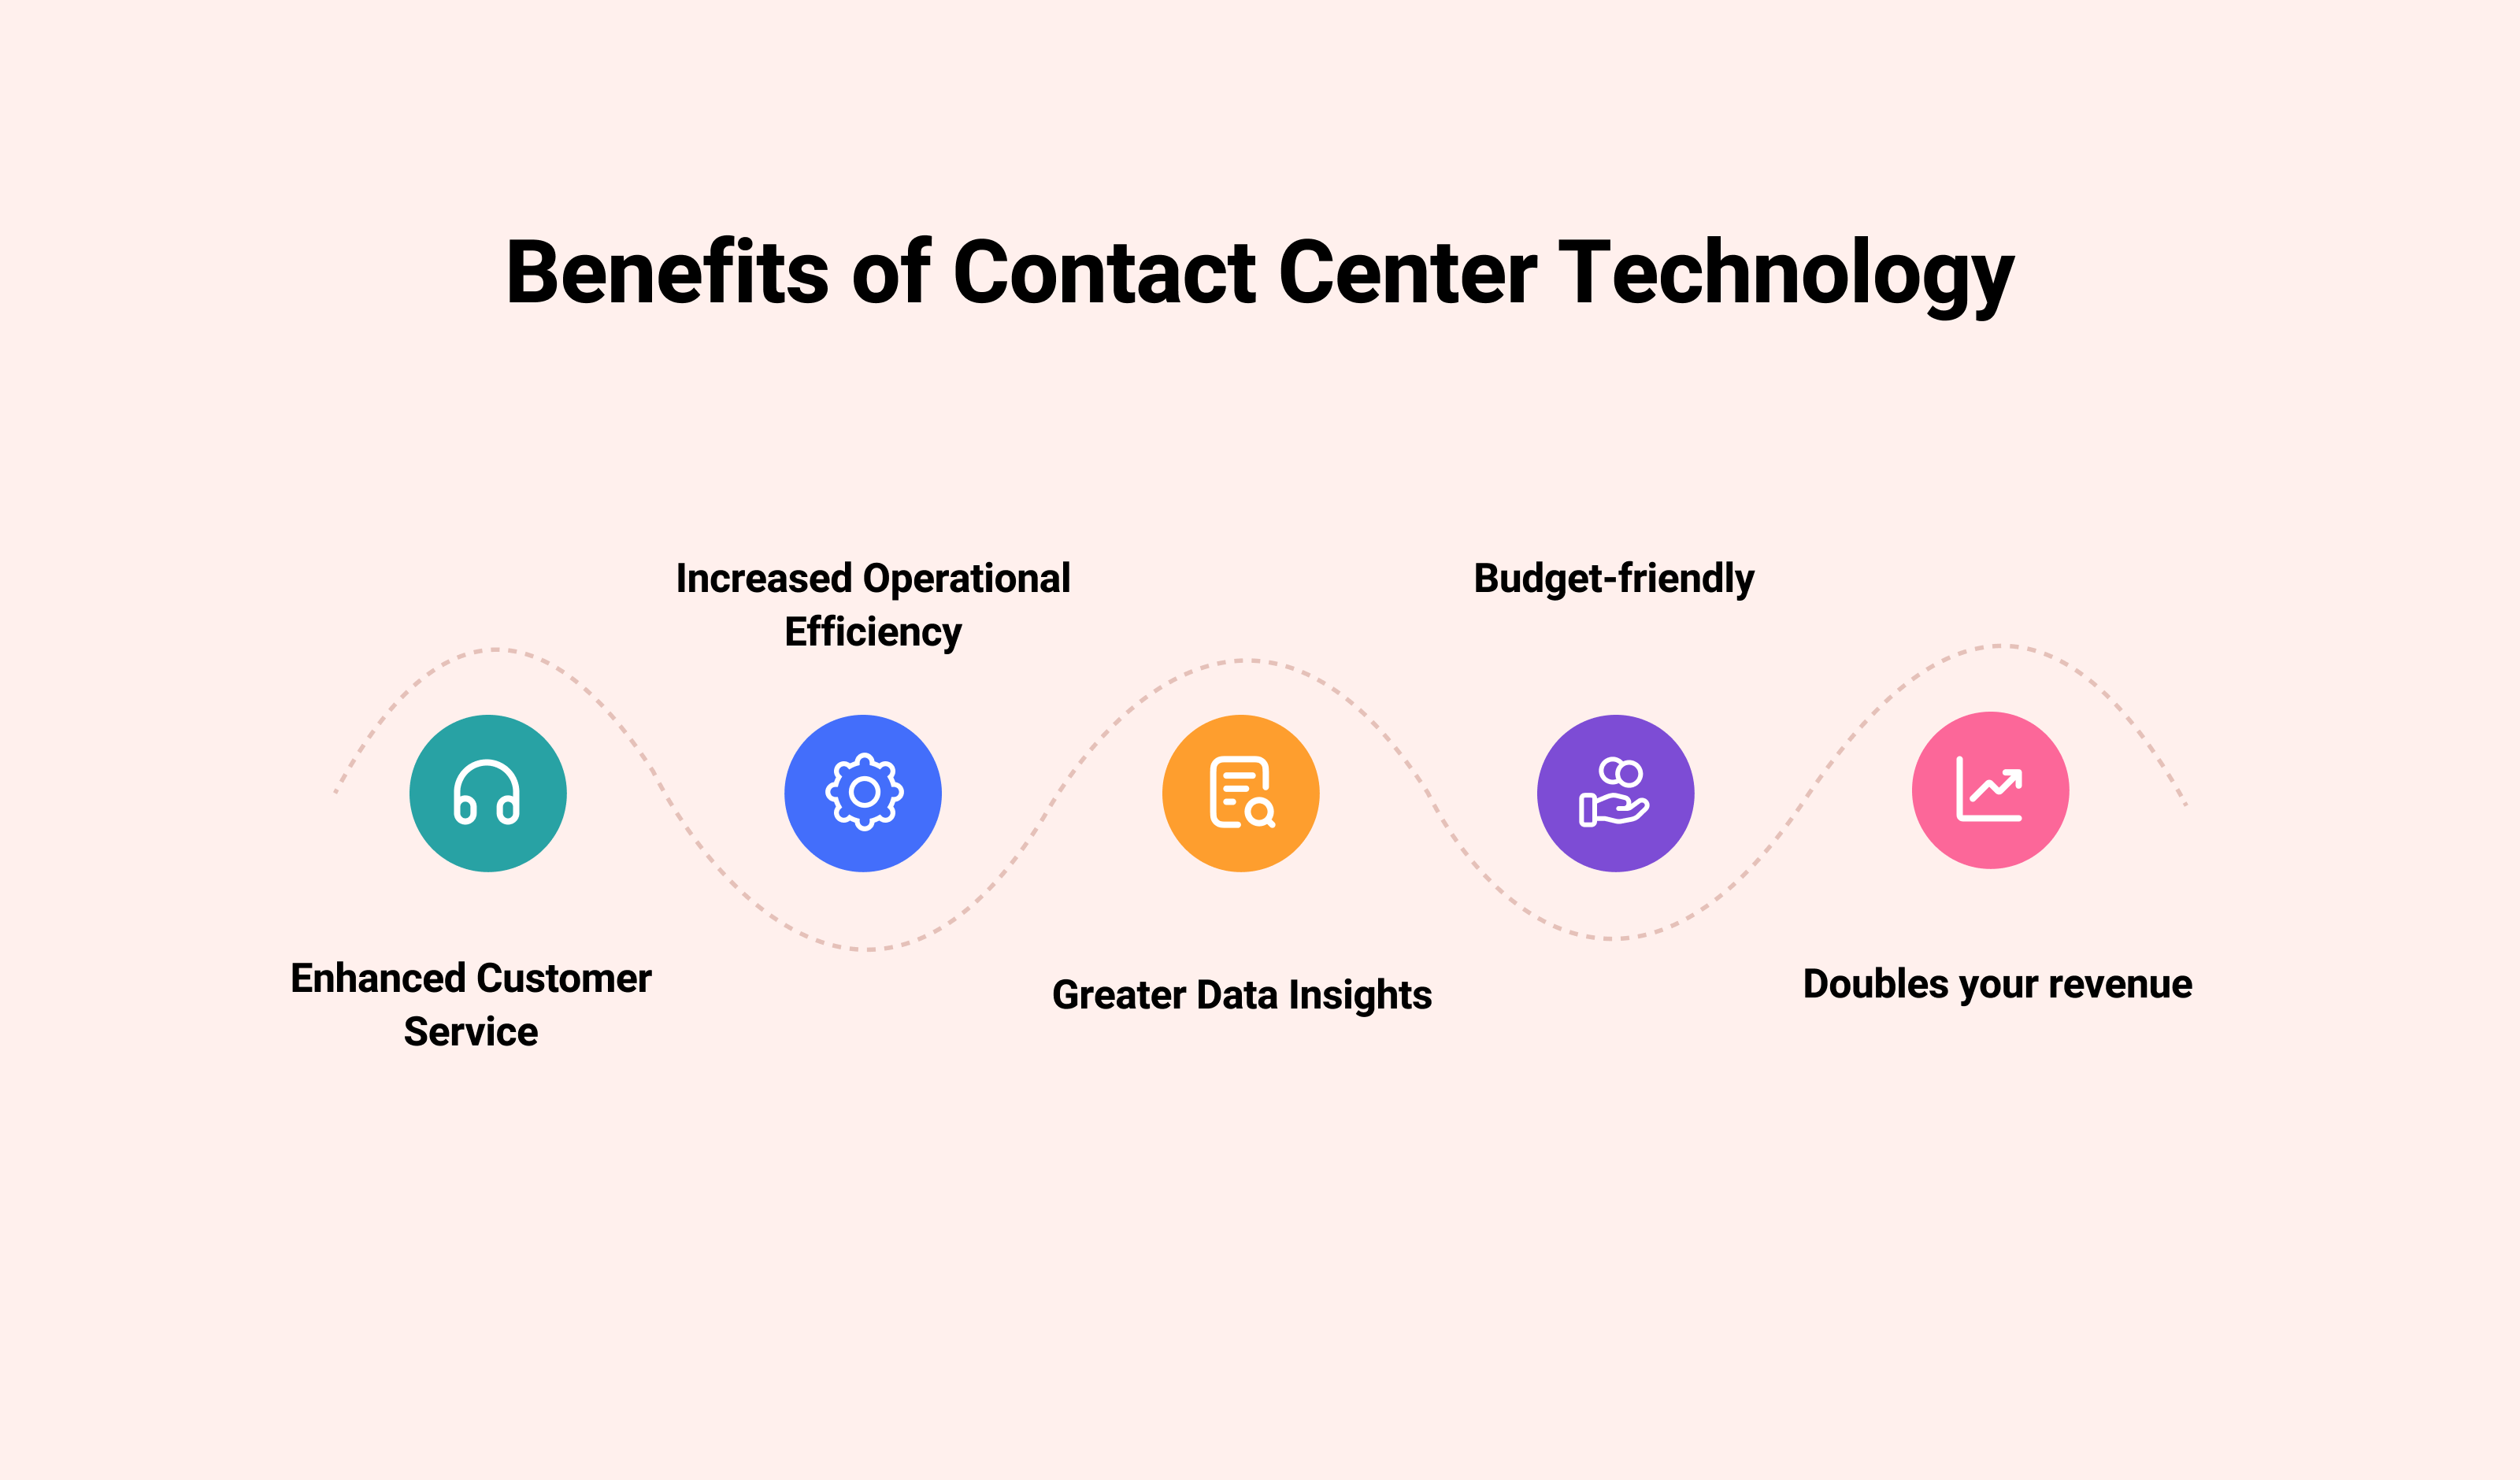 Benefits of Contact Center Technology: